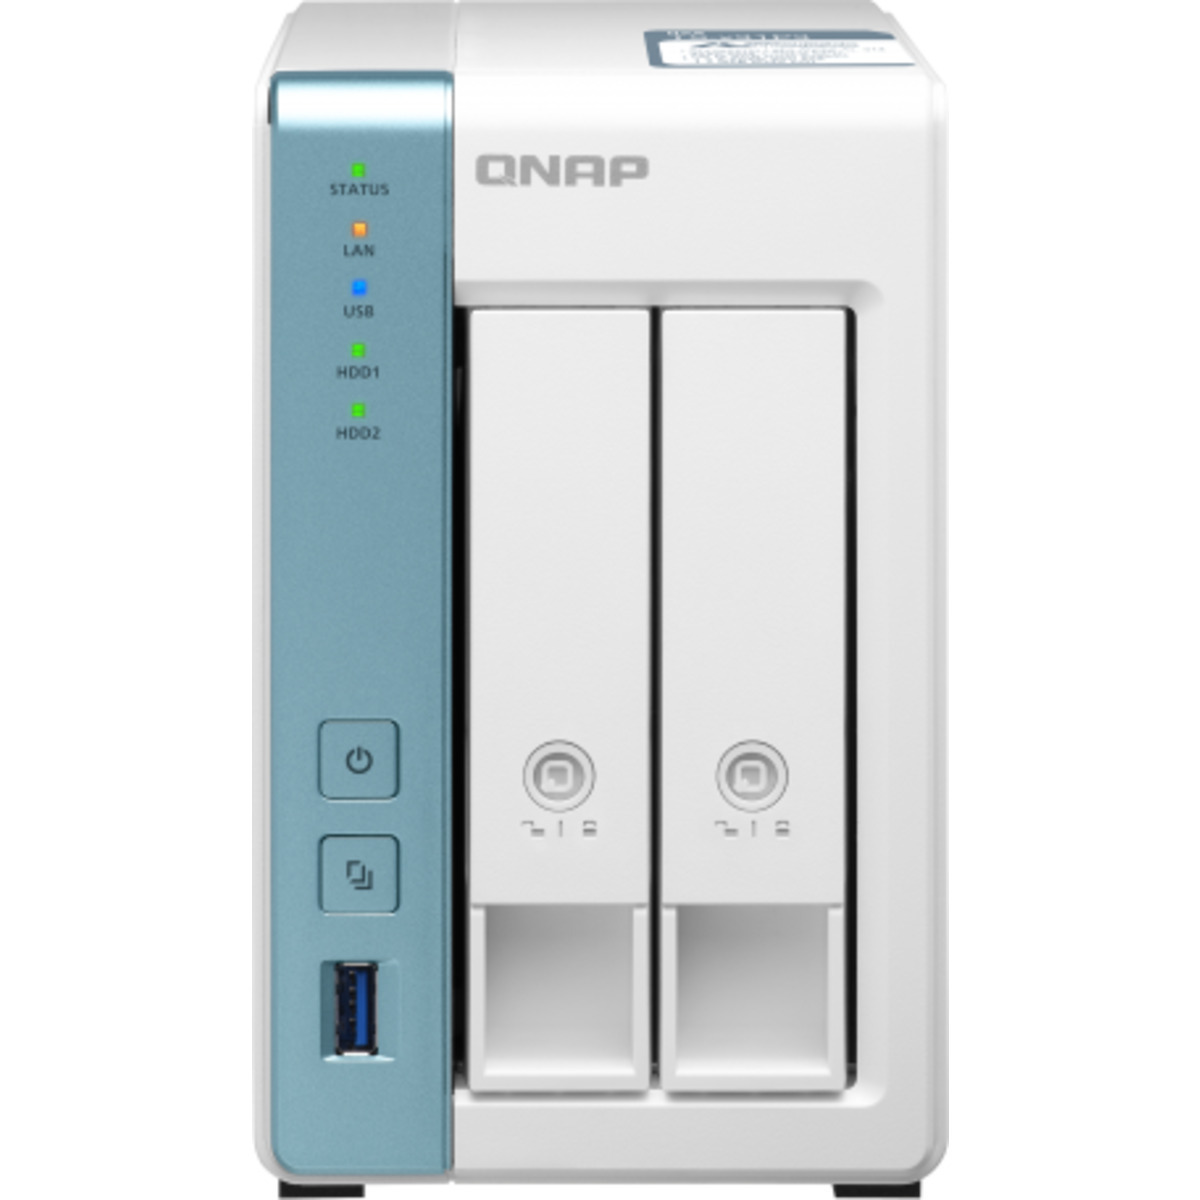 buy $909 QNAP TS-231P3 16tb Desktop NAS - Network Attached Storage Device 2x8000gb Seagate EXOS ST8000NM000A 3.5 7200rpm SATA 6Gb/s HDD ENTERPRISE Class Drives Installed - Burn-In Tested - FREE RAM UPGRADE - nas headquarters buy network attached storage server device das new raid-5 free shipping usa christmas new year holiday sale TS-231P3